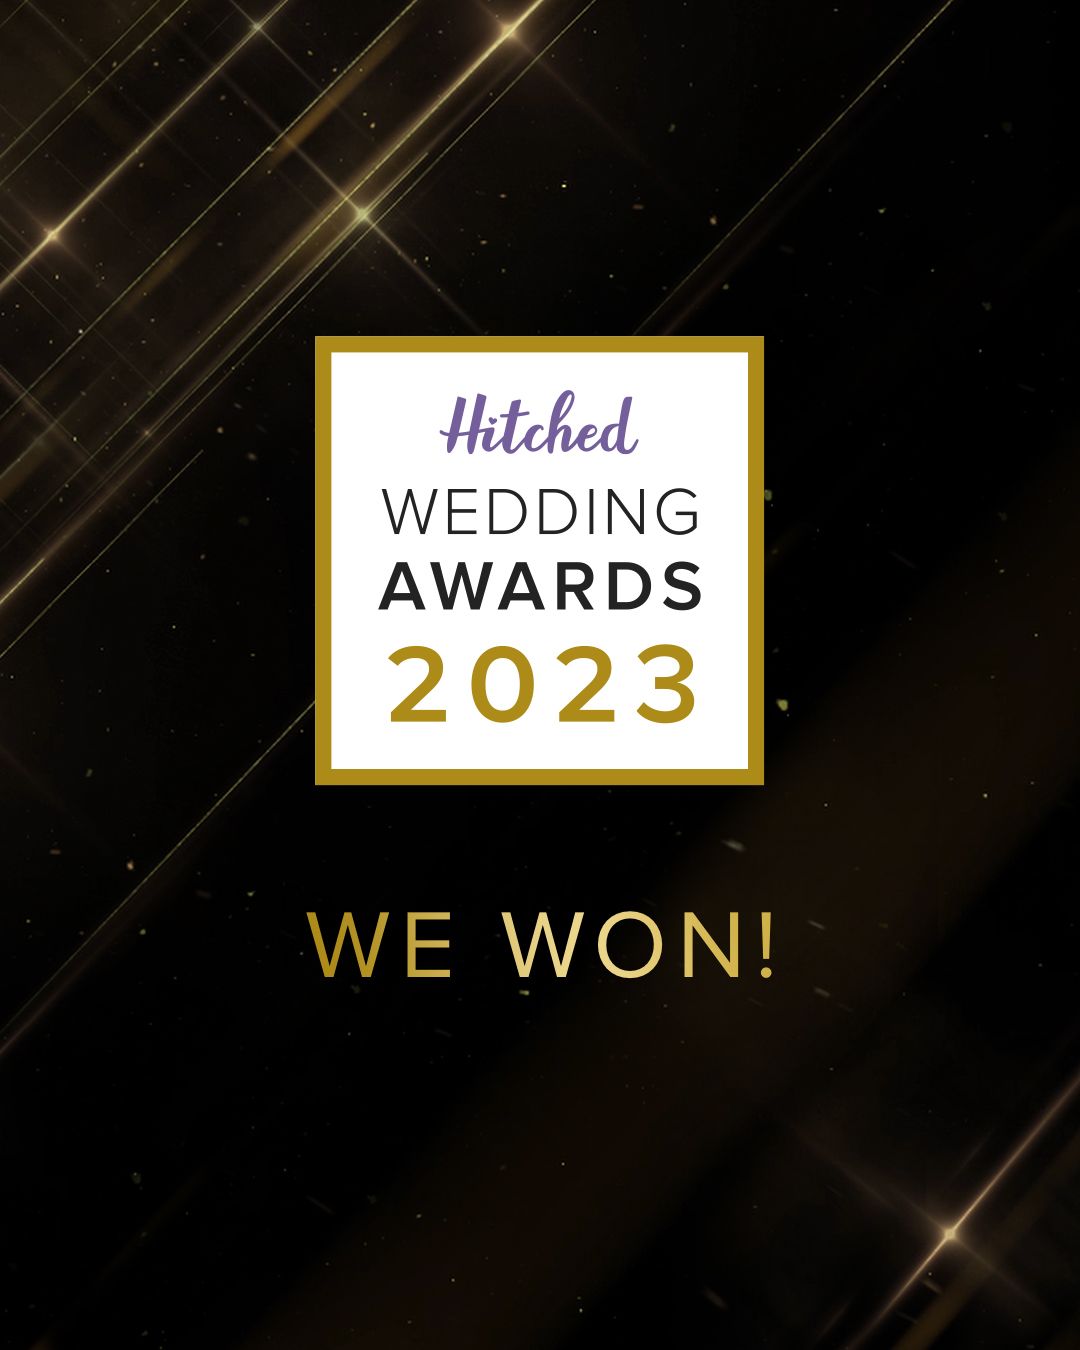 Hitched Supplier of the year 2022 & now 2023!